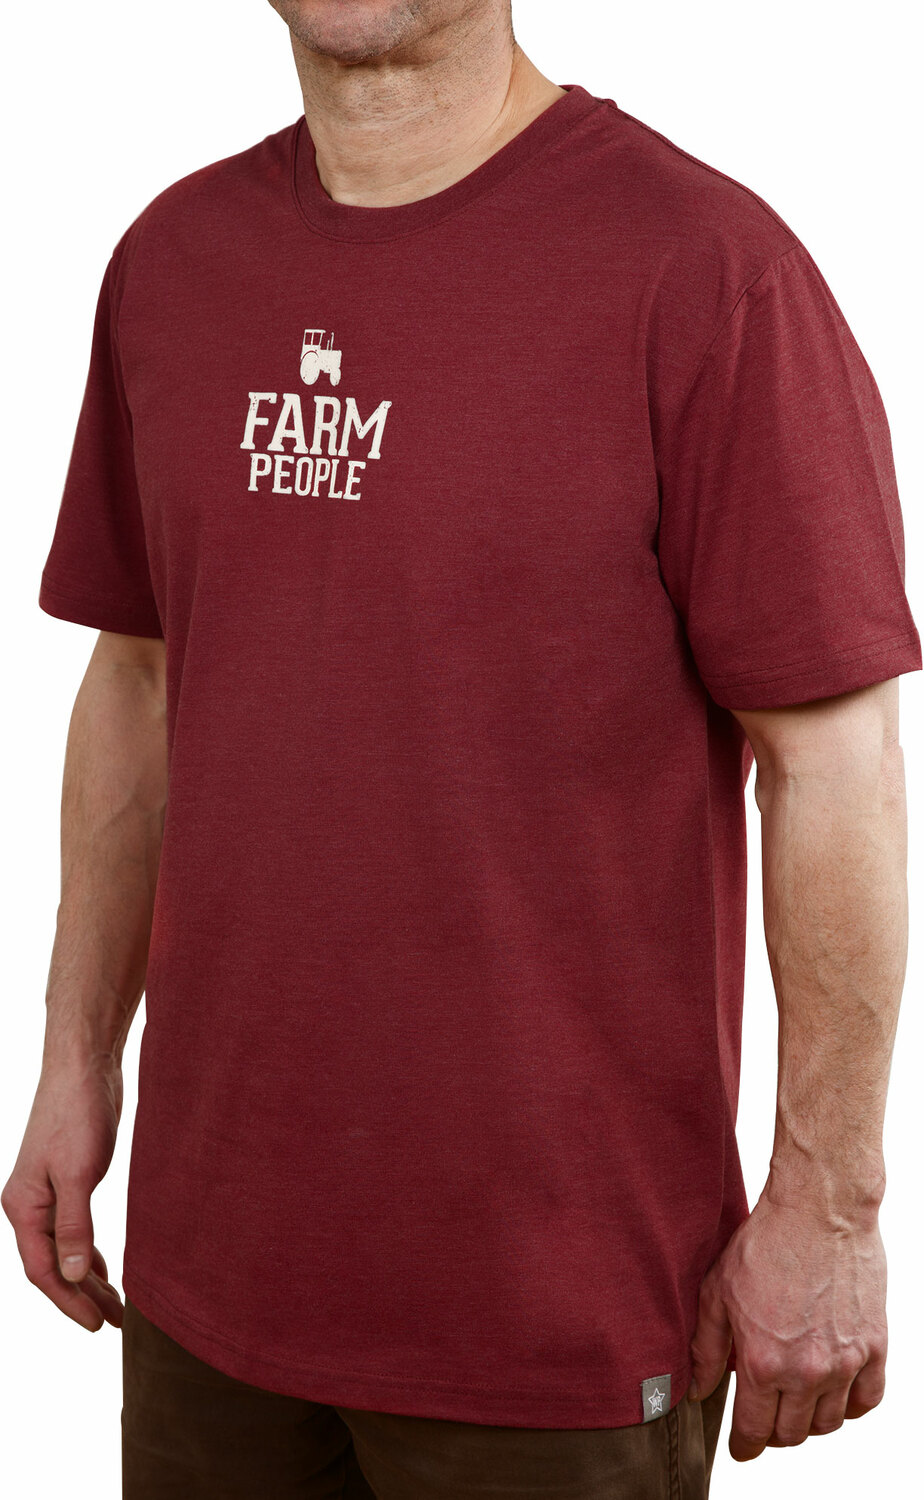 Farm People by We People - Farm People -  Small Red Unisex T-Shirt